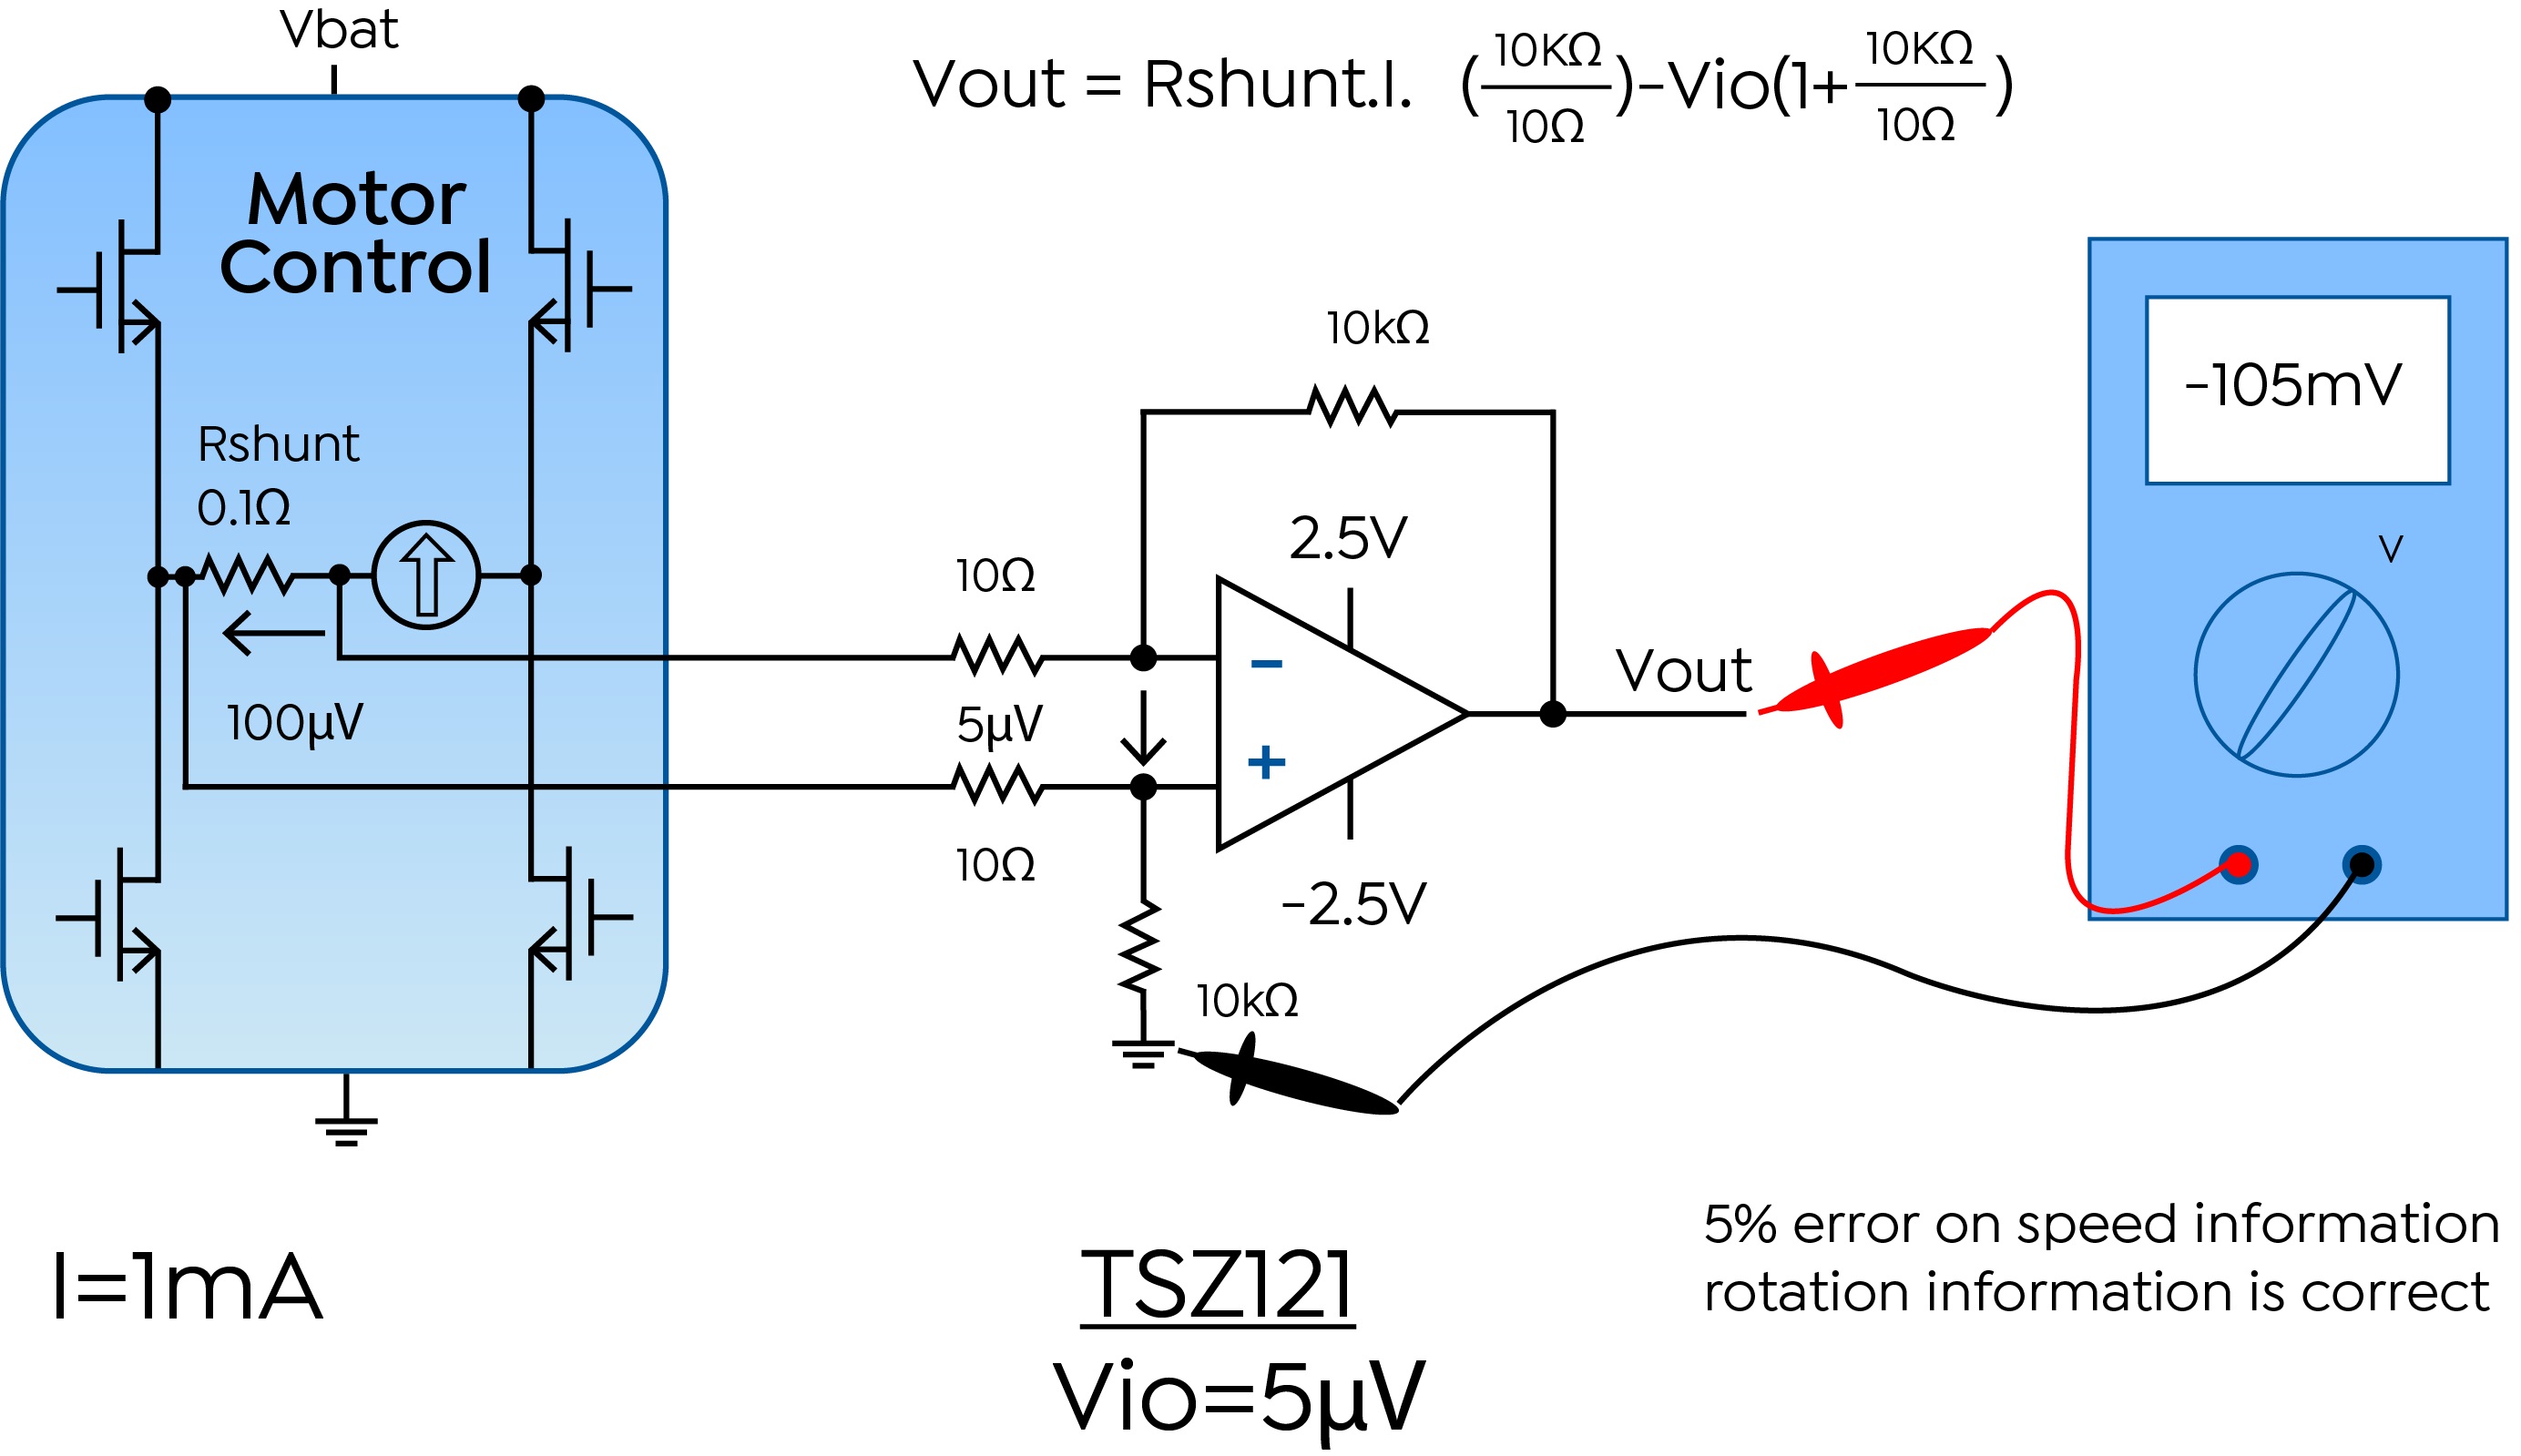 The impact of Vio on a motor control